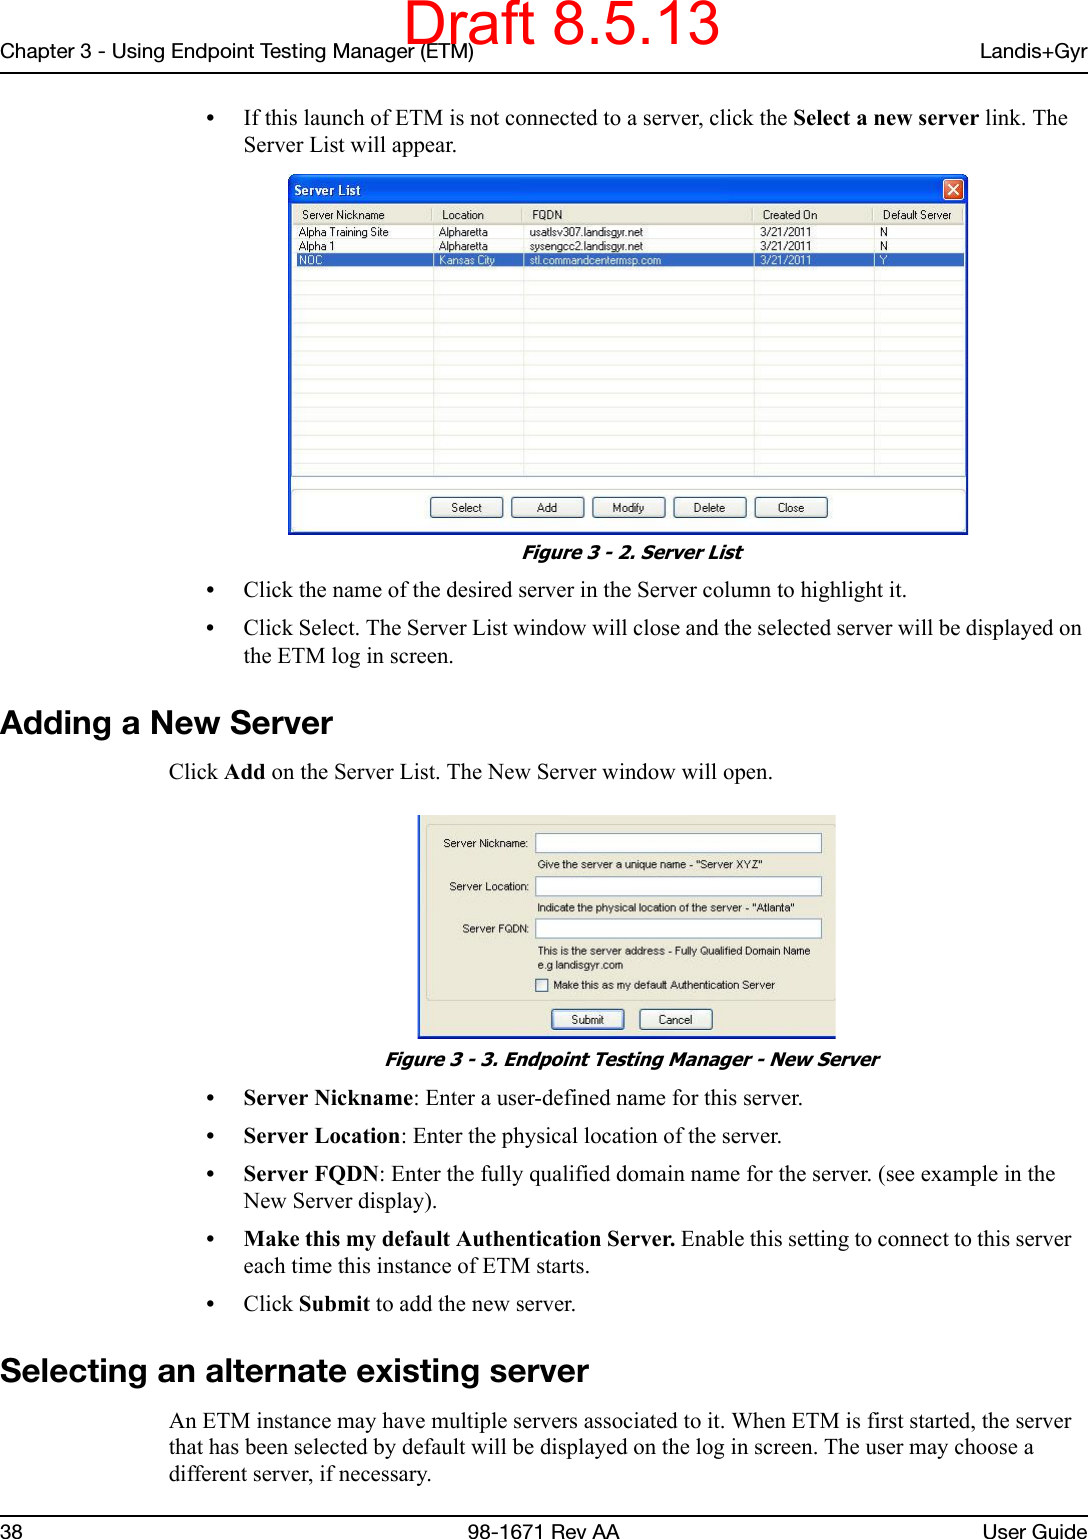 Chapter 3 - Using Endpoint Testing Manager (ETM) Landis+Gyr38 98-1671 Rev AA User Guide•If this launch of ETM is not connected to a server, click the Select a new server link. The Server List will appear. Figure 3 - 2. Server List•Click the name of the desired server in the Server column to highlight it.•Click Select. The Server List window will close and the selected server will be displayed on the ETM log in screen.Adding a New ServerClick Add on the Server List. The New Server window will open. Figure 3 - 3. Endpoint Testing Manager - New Server• Server Nickname: Enter a user-defined name for this server.• Server Location: Enter the physical location of the server.• Server FQDN: Enter the fully qualified domain name for the server. (see example in the New Server display). • Make this my default Authentication Server. Enable this setting to connect to this server   each time this instance of ETM starts.•Click Submit to add the new server.Selecting an alternate existing serverAn ETM instance may have multiple servers associated to it. When ETM is first started, the server that has been selected by default will be displayed on the log in screen. The user may choose a different server, if necessary.Draft 8.5.13